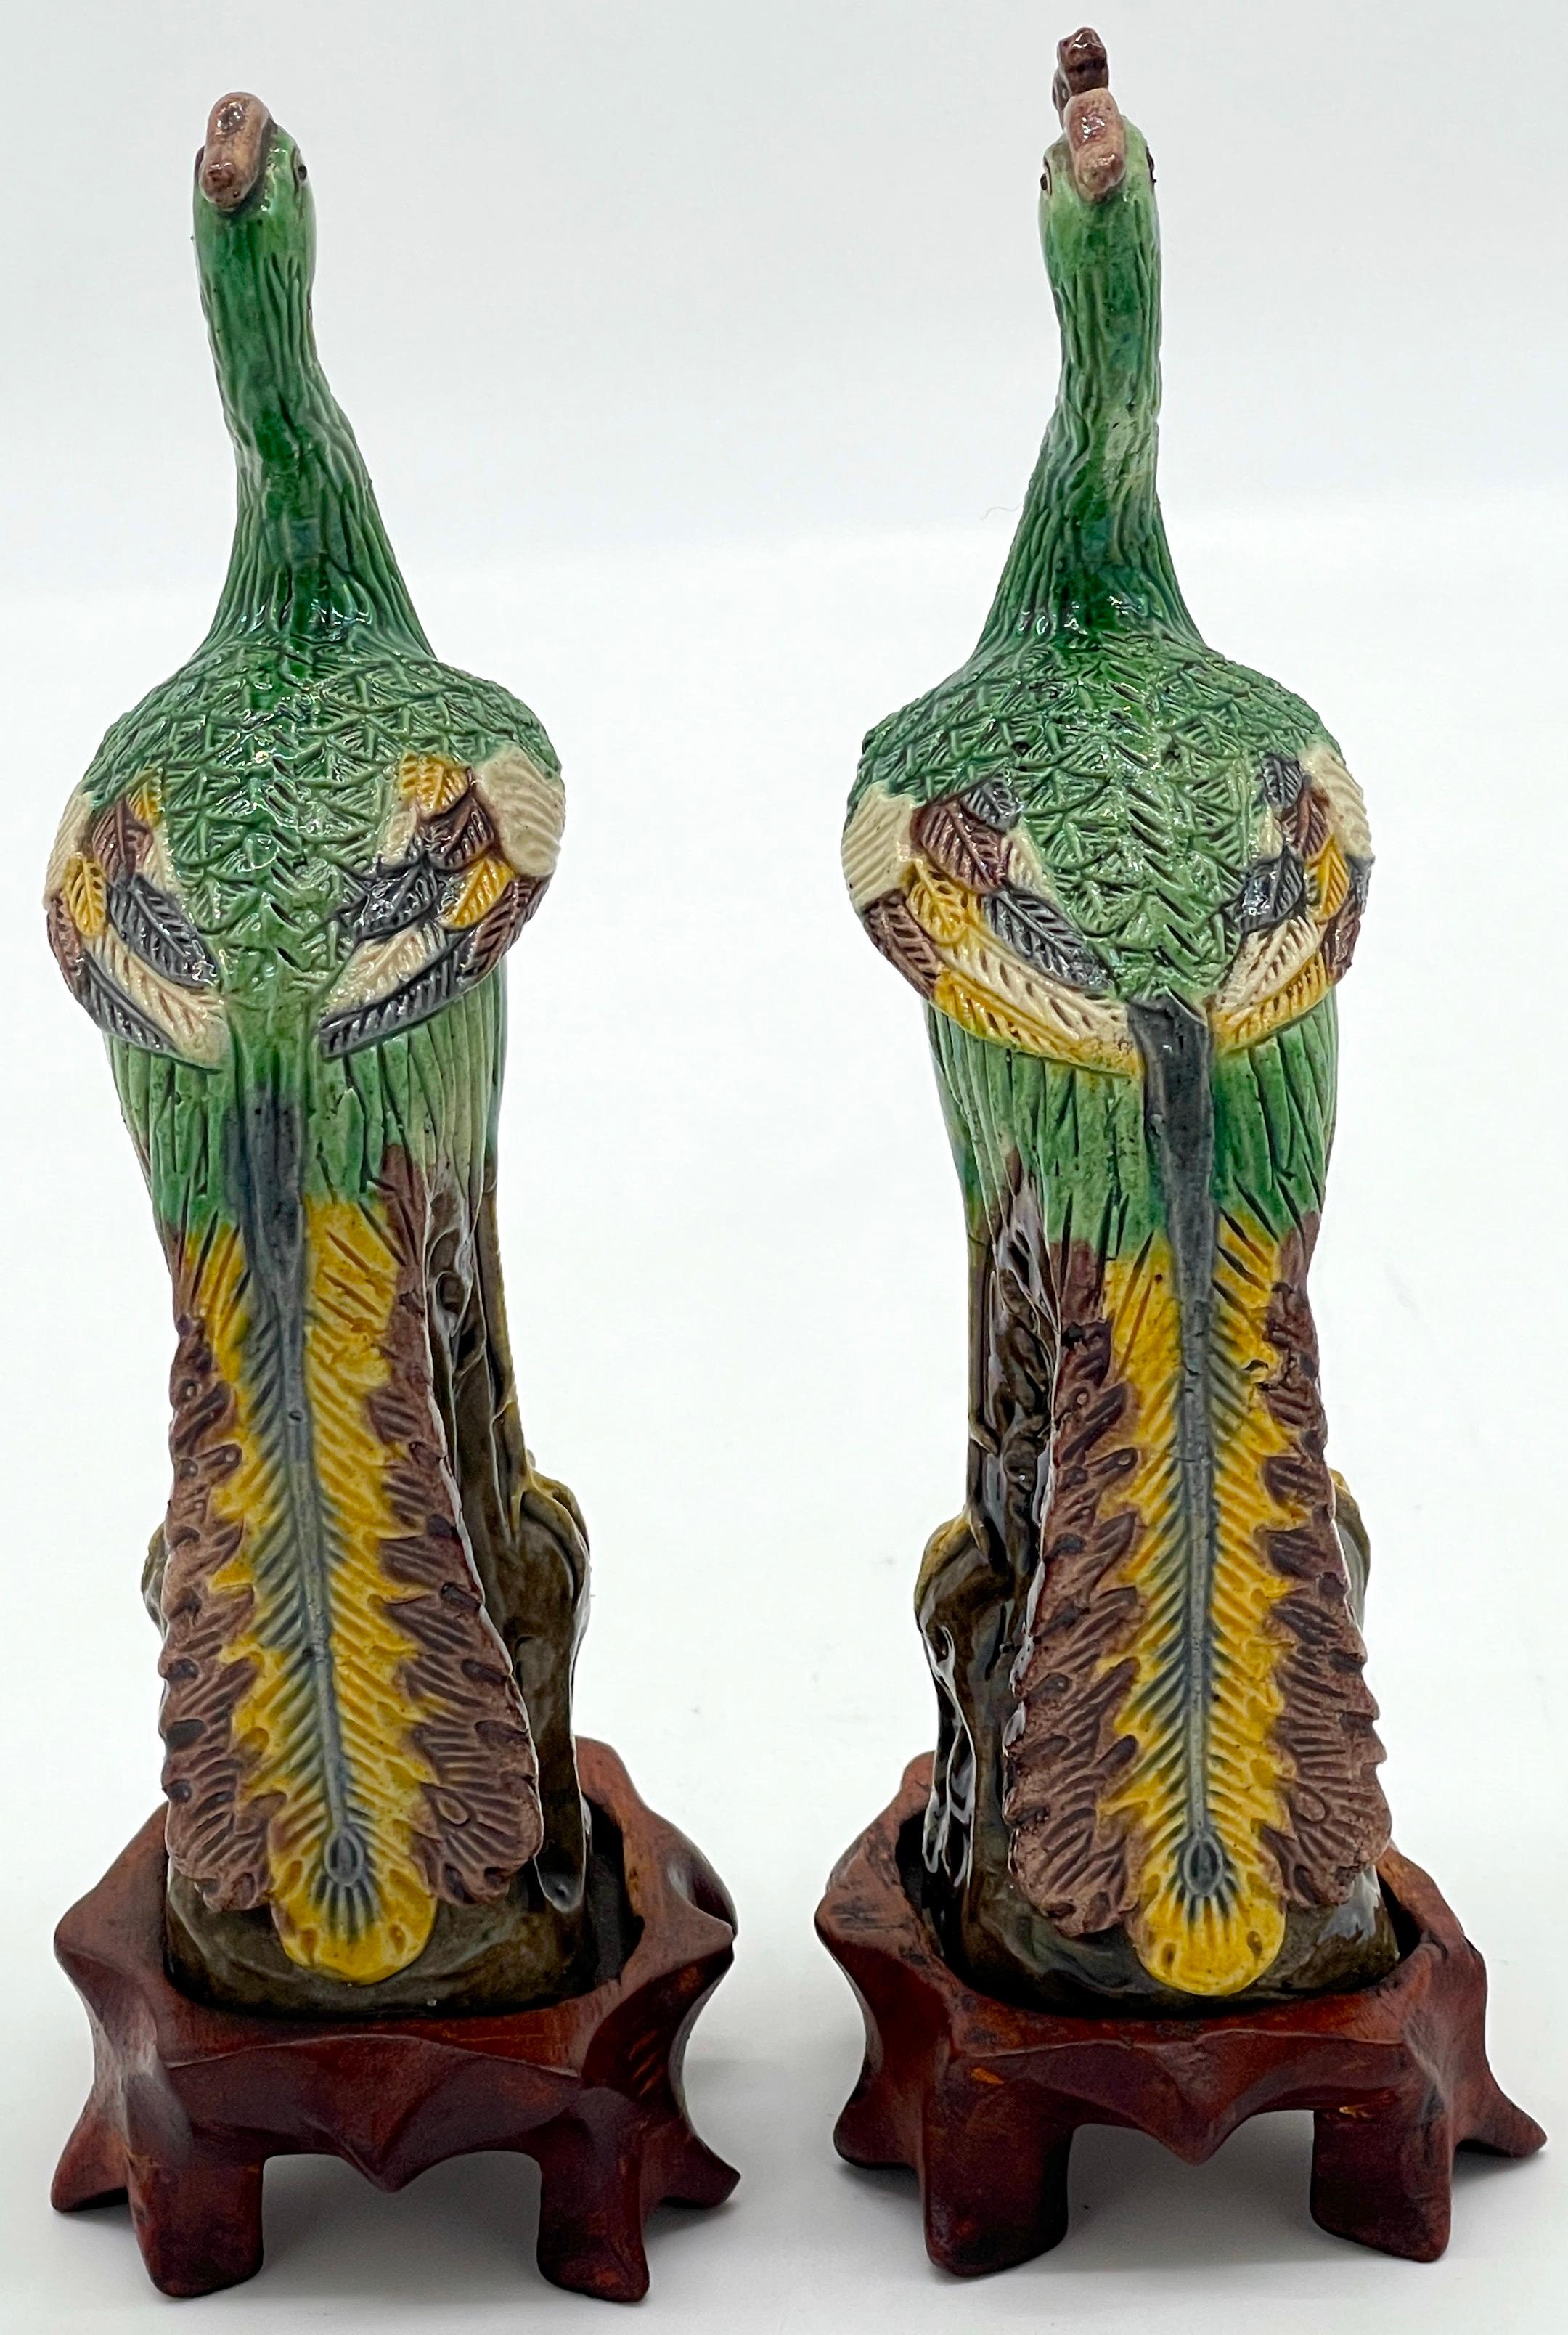 A Diminutive Pair of Chinese Sancai Glazed Phoenix Birds, on Hardwood Stands  In Good Condition For Sale In West Palm Beach, FL